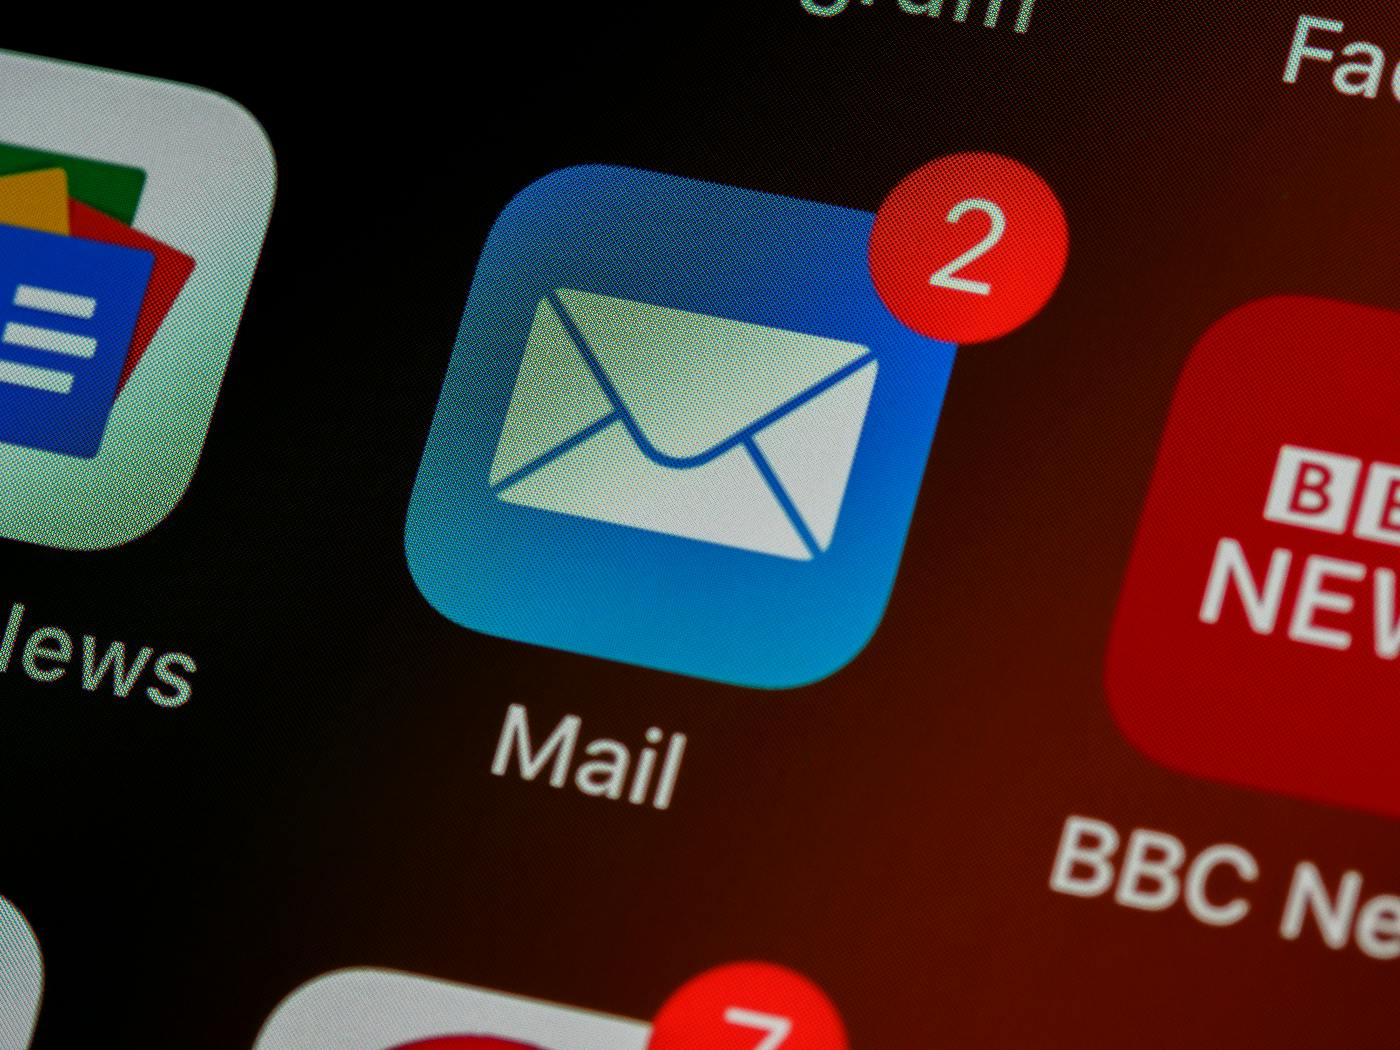 An email icon on a screen showing two emails received